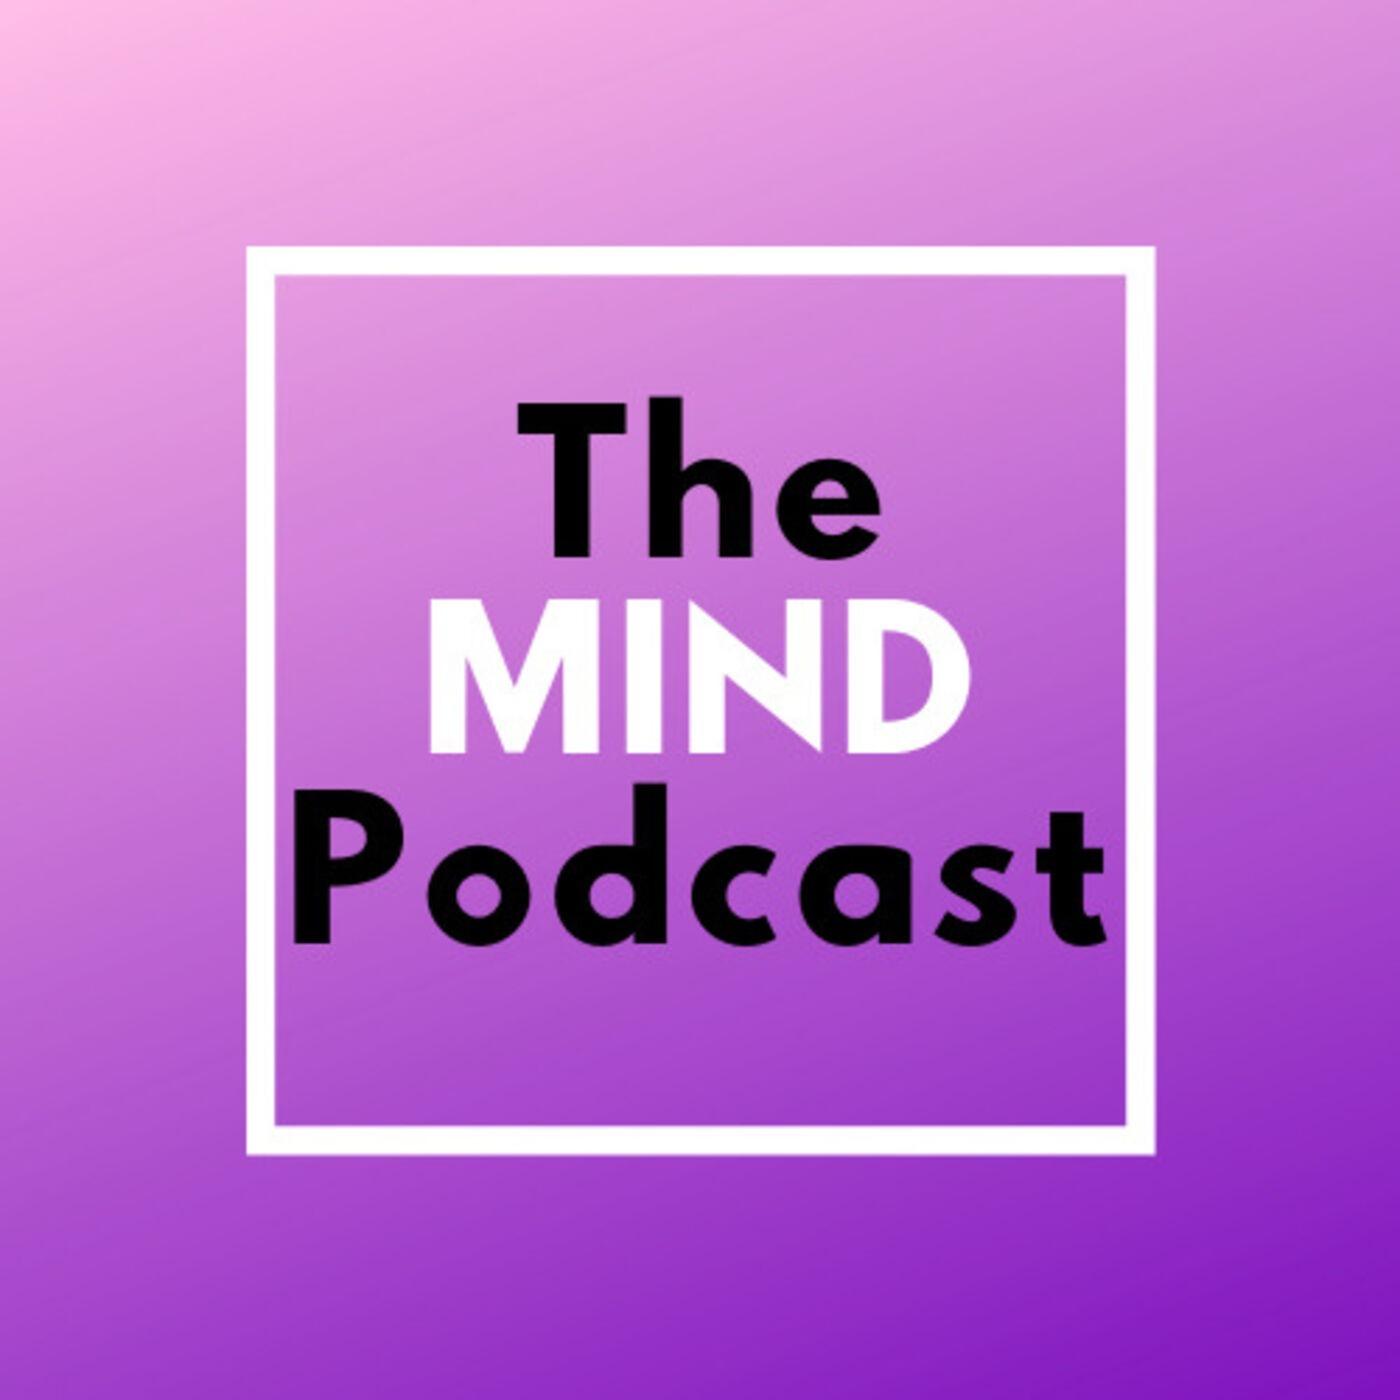 The MIND Podcast